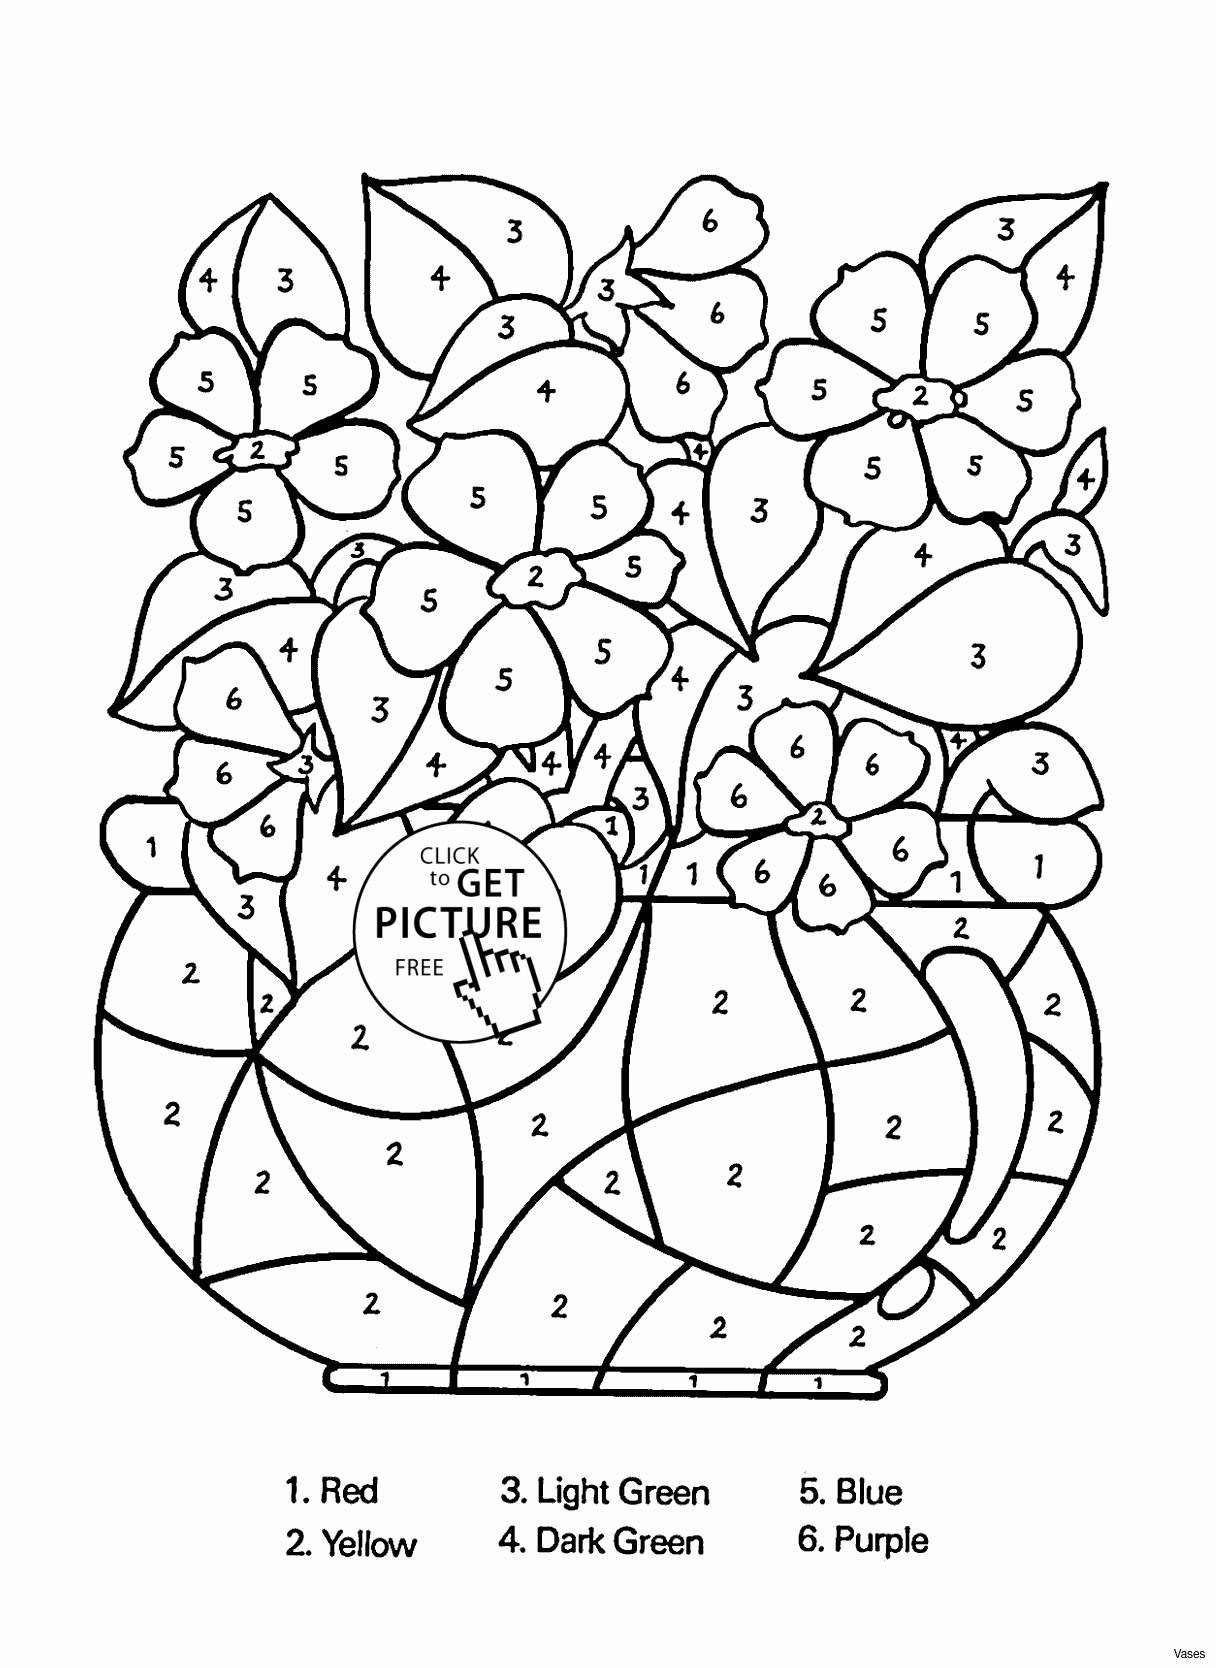 clear square vase of white glass vase elegant vases flower vase coloring page pages in white glass vase elegant vases flower vase coloring page pages flowers in a top i 0d